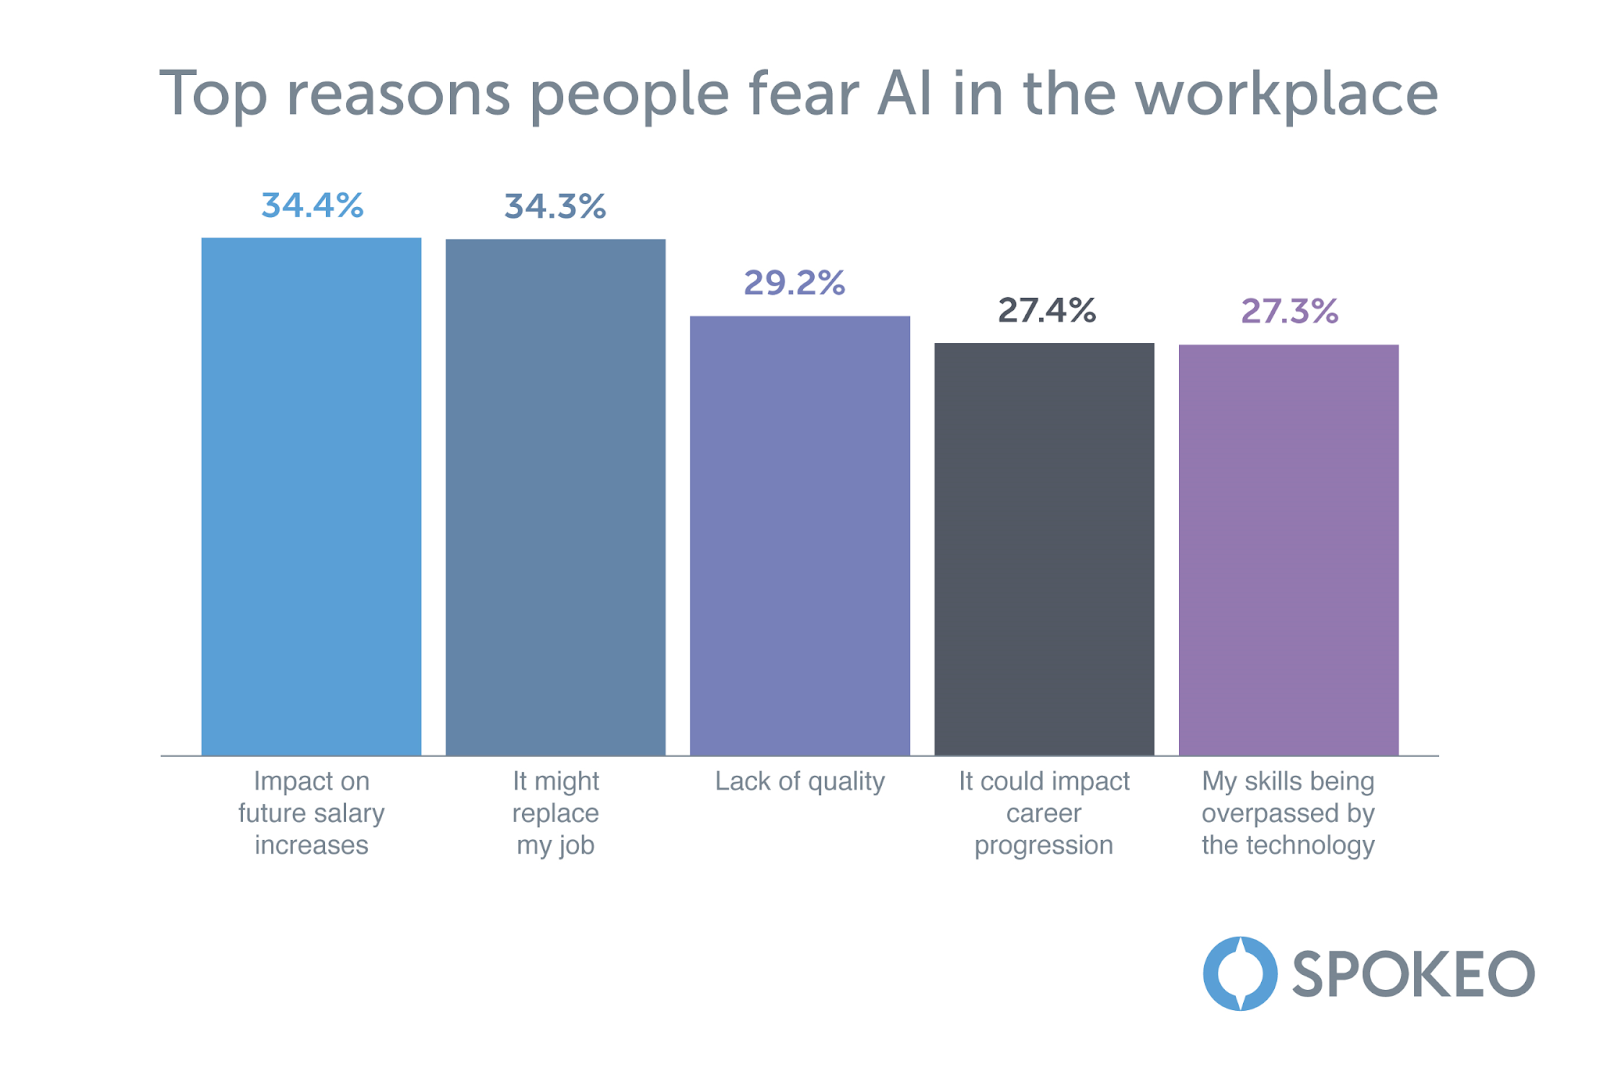 Image of a graph showing results to the top reasons fear AI in the workplace.